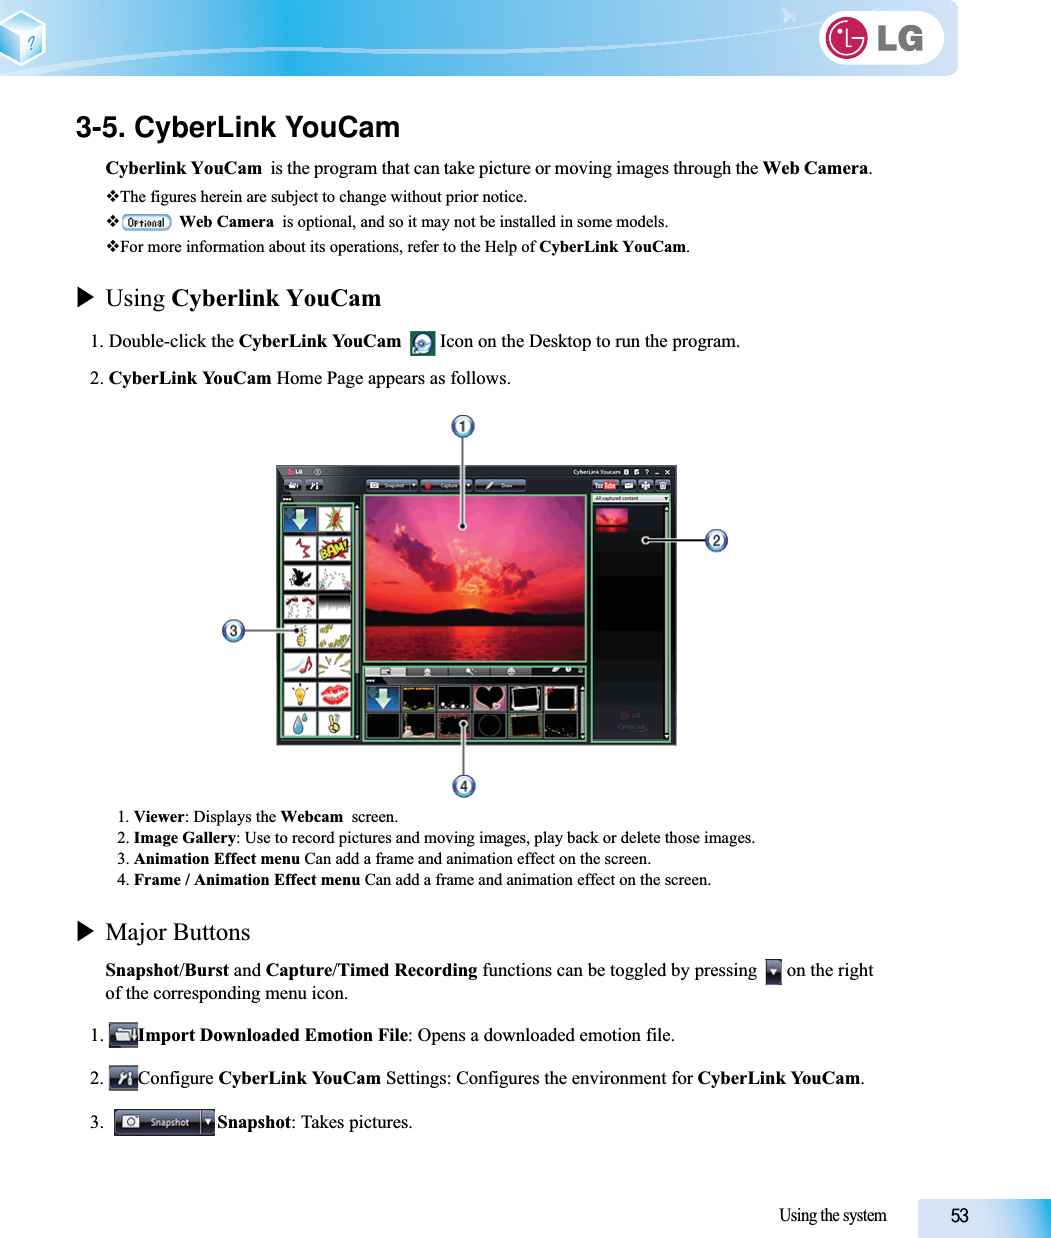 Using the system3-5. CyberLink YouCamCyberlink YouCam  is the program that can take picture or moving images through the Web Camera.The figures herein are subject to change without prior notice.Web Camera  is optional, and so it may not be installed in some models.For more information about its operations, refer to the Help of CyberLink YouCam.XUsing Cyberlink YouCam1. Double-click the CyberLink YouCam   Icon on the Desktop to run the program.2. CyberLink YouCam Home Page appears as follows.1. Viewer: Displays the Webcam  screen.2. Image Gallery: Use to record pictures and moving images, play back or delete those images.3. Animation Effect menu Can add a frame and animation effect on the screen.4. Frame / Animation Effect menu Can add a frame and animation effect on the screen.XMajor ButtonsSnapshot/Burst and Capture/Timed Recording functions can be toggled by pressing   on the rightof the corresponding menu icon.1. Import Downloaded Emotion File: Opens a downloaded emotion file.2. Configure CyberLink YouCam Settings: Configures the environment for CyberLink YouCam.3. Snapshot: Takes pictures.